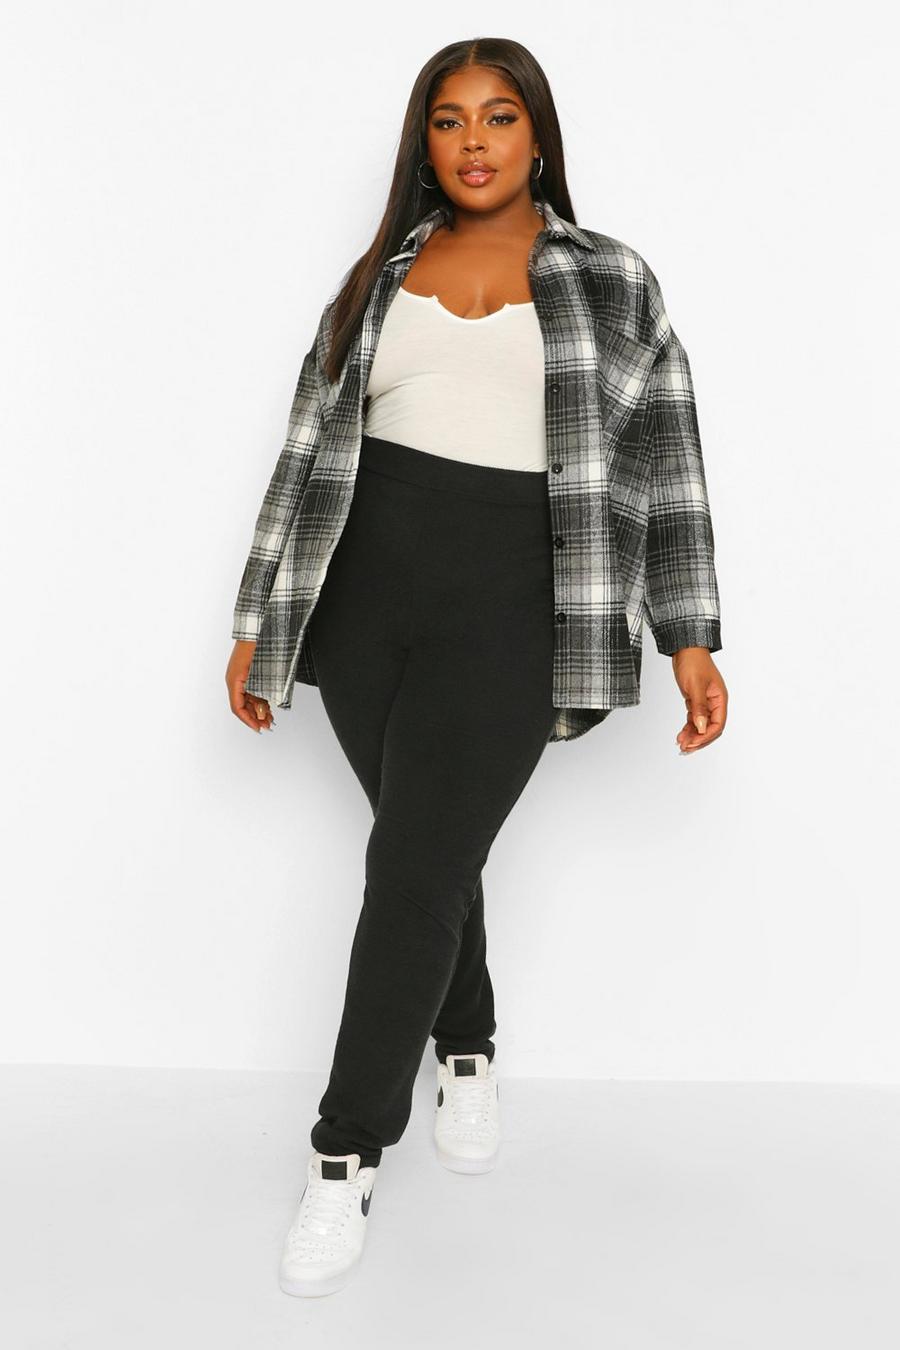 Fashion Look Featuring boohoo Plus Size Tops and boohoo Skinny